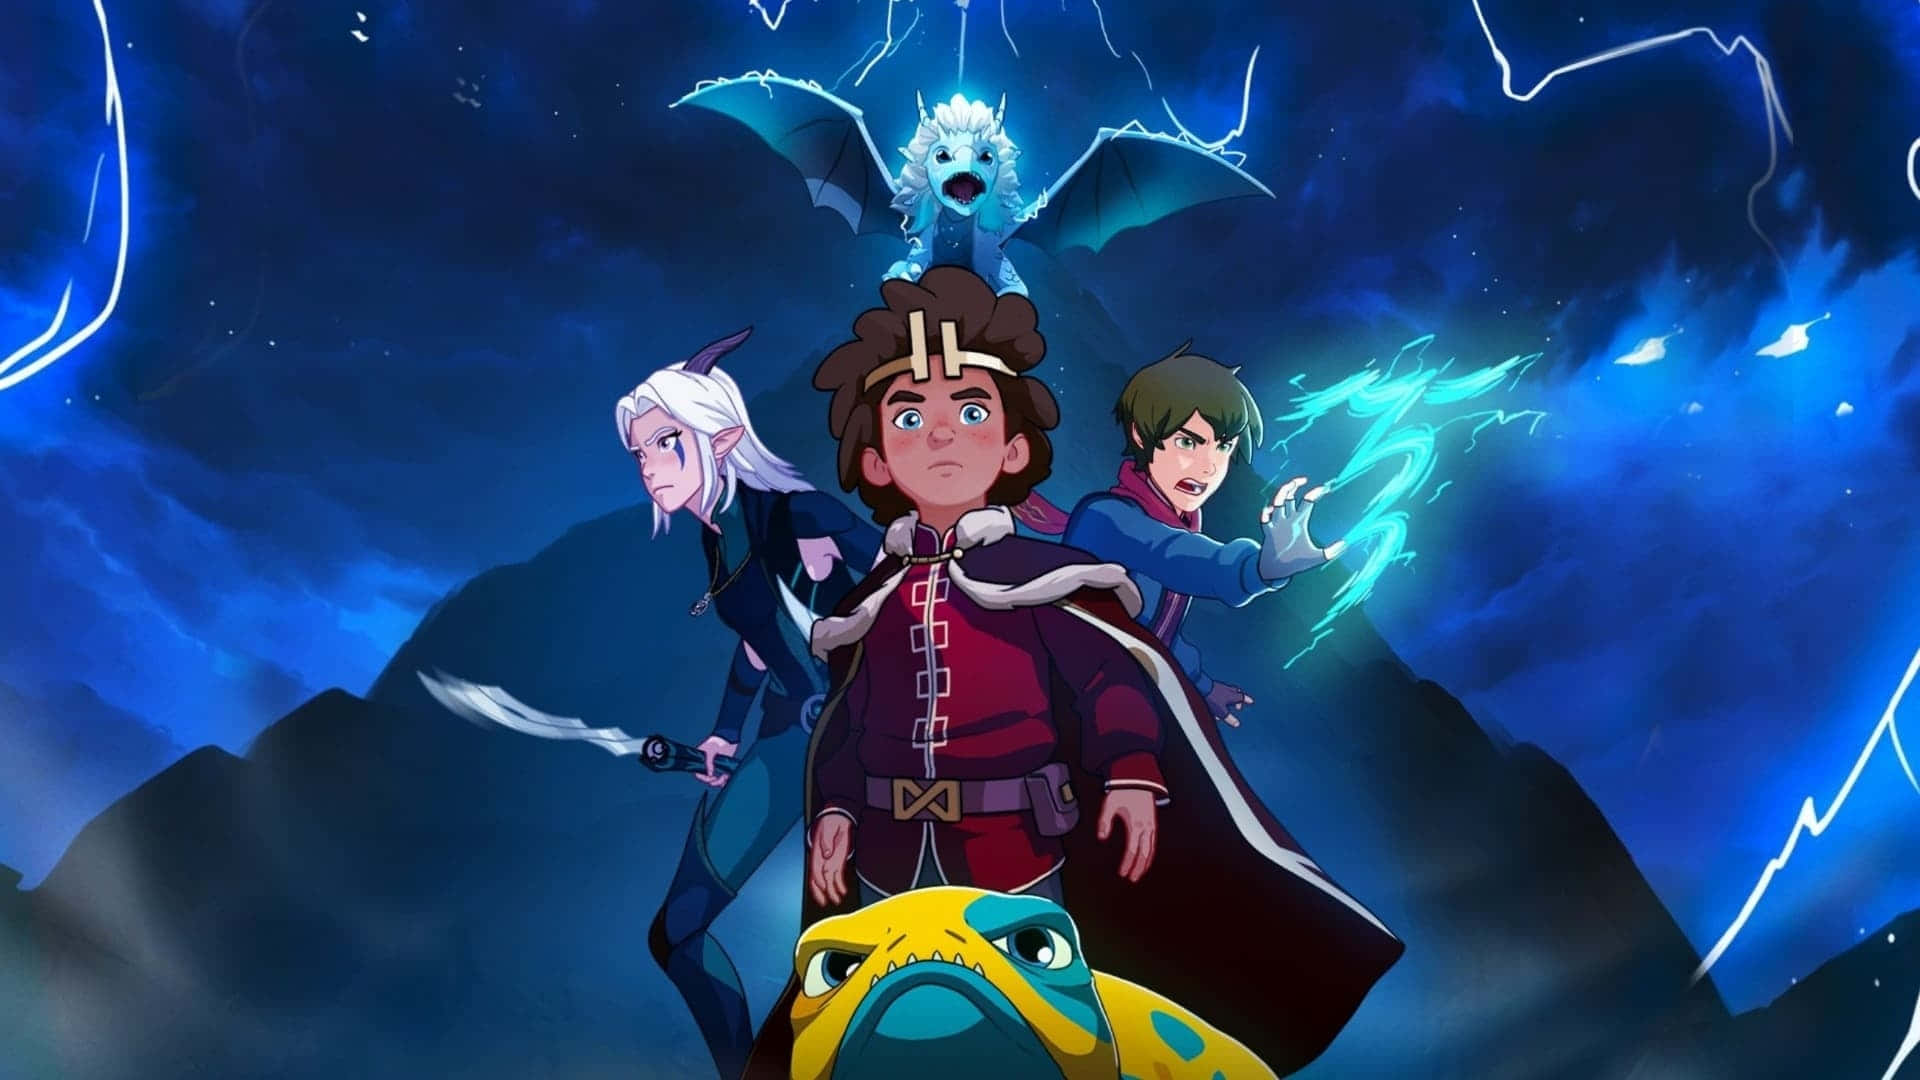 Get Ready for an Exciting Adventure with The Dragon Prince Wallpaper